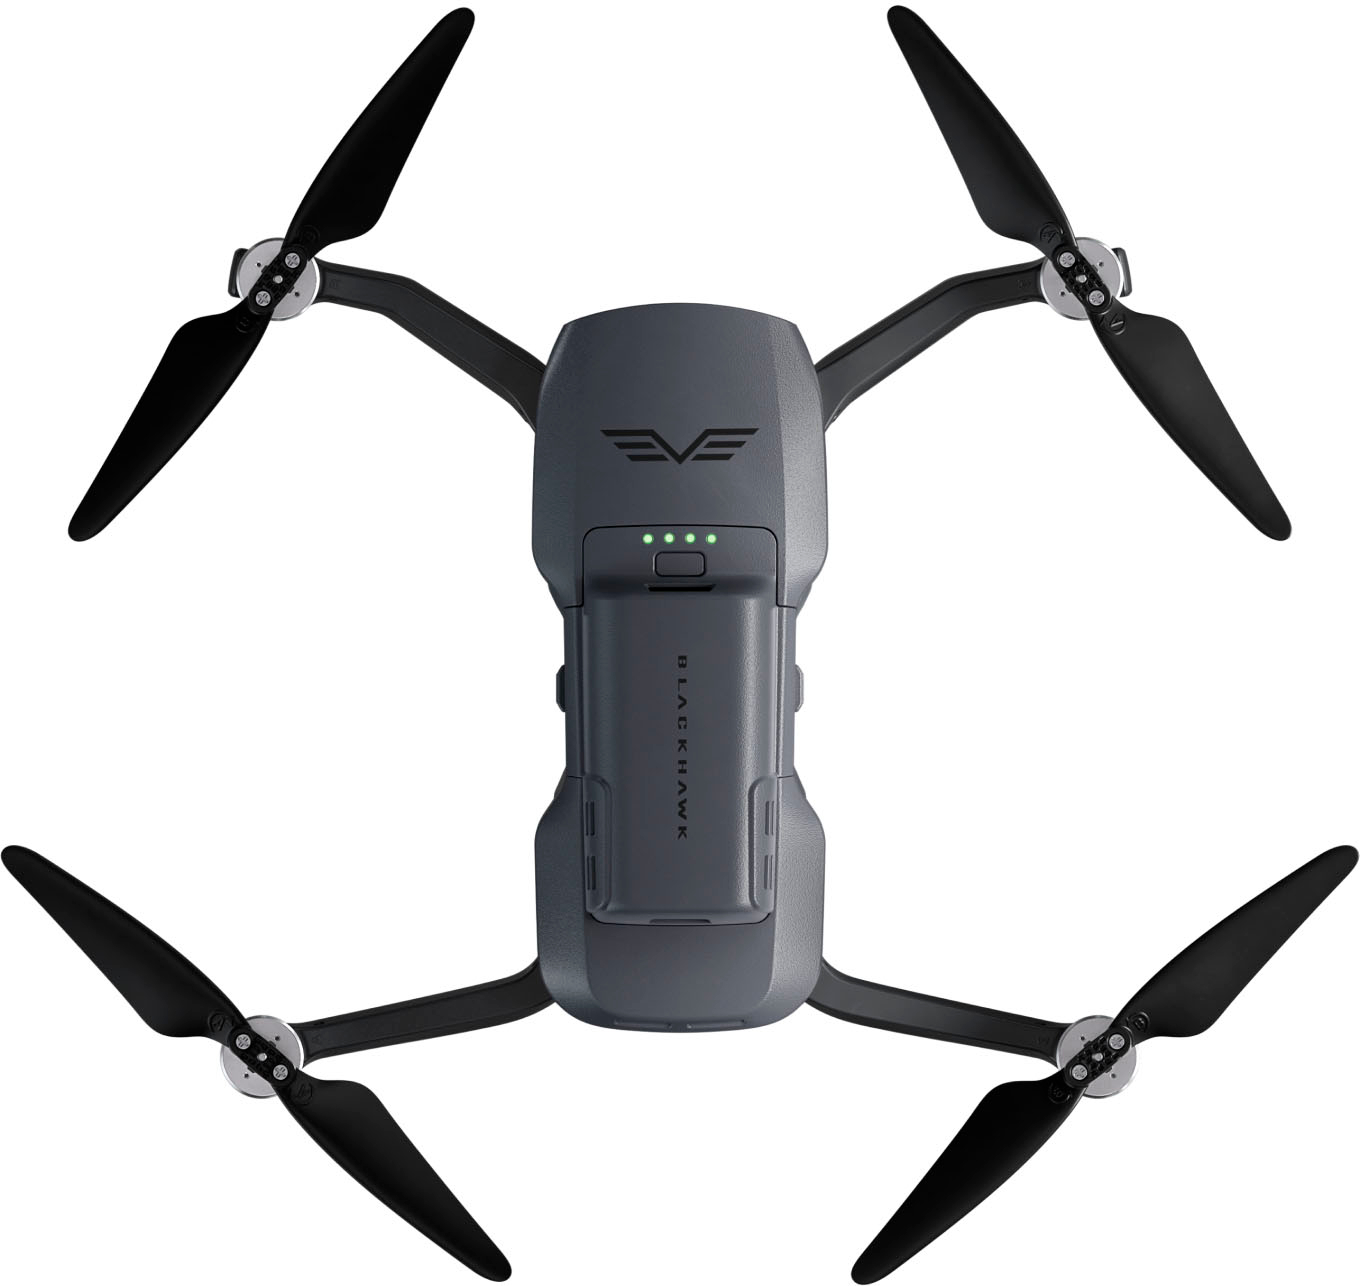 Angle View: DJI - Geek Squad Certified Refurbished Mavic 3 Pro Fly More Combo Drone and RC Remote Control with Built-in Screen - Gray